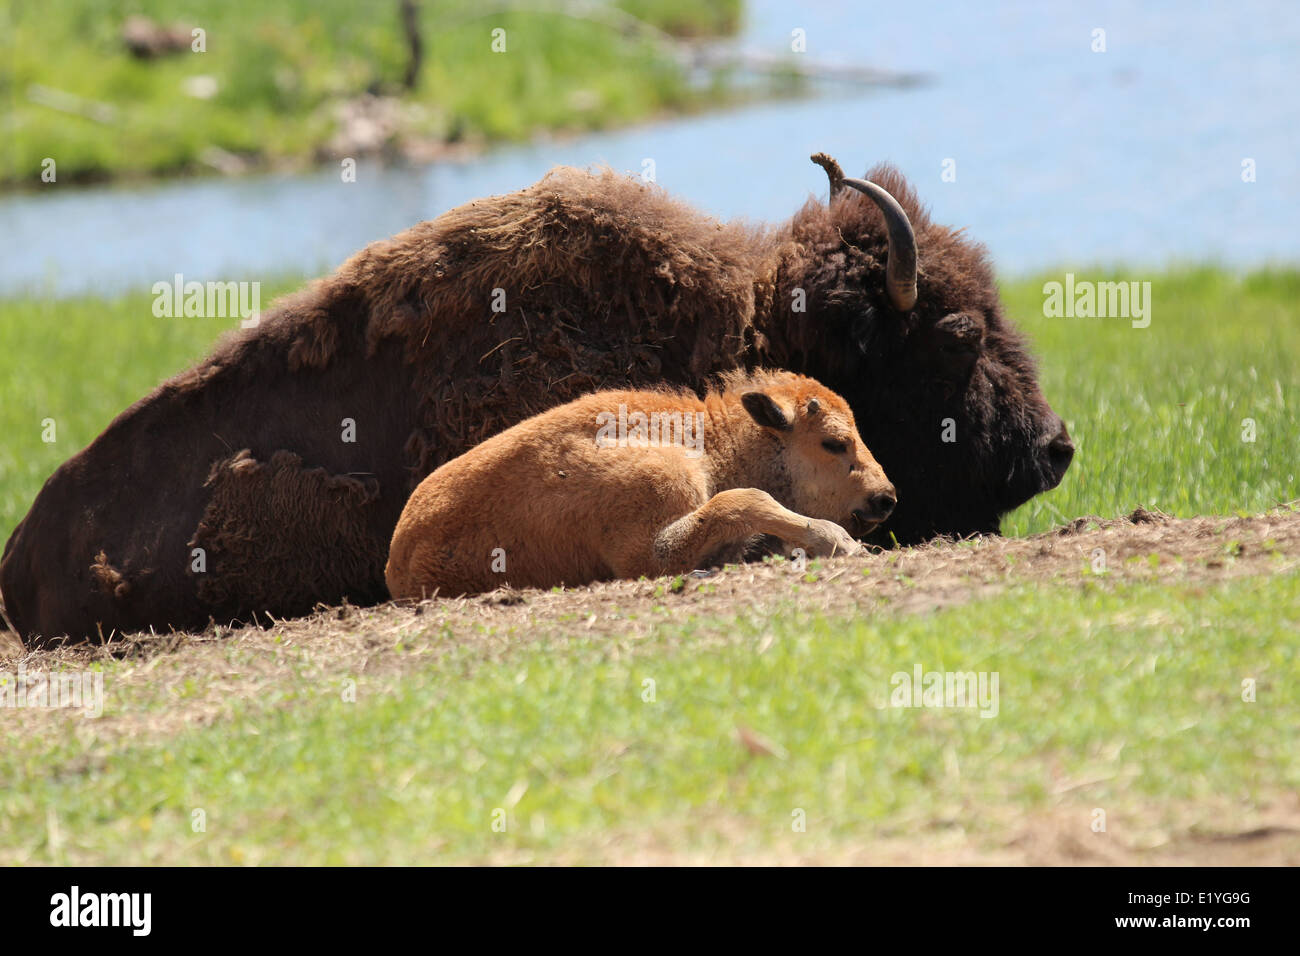 Mother and baby animal Stock Photo